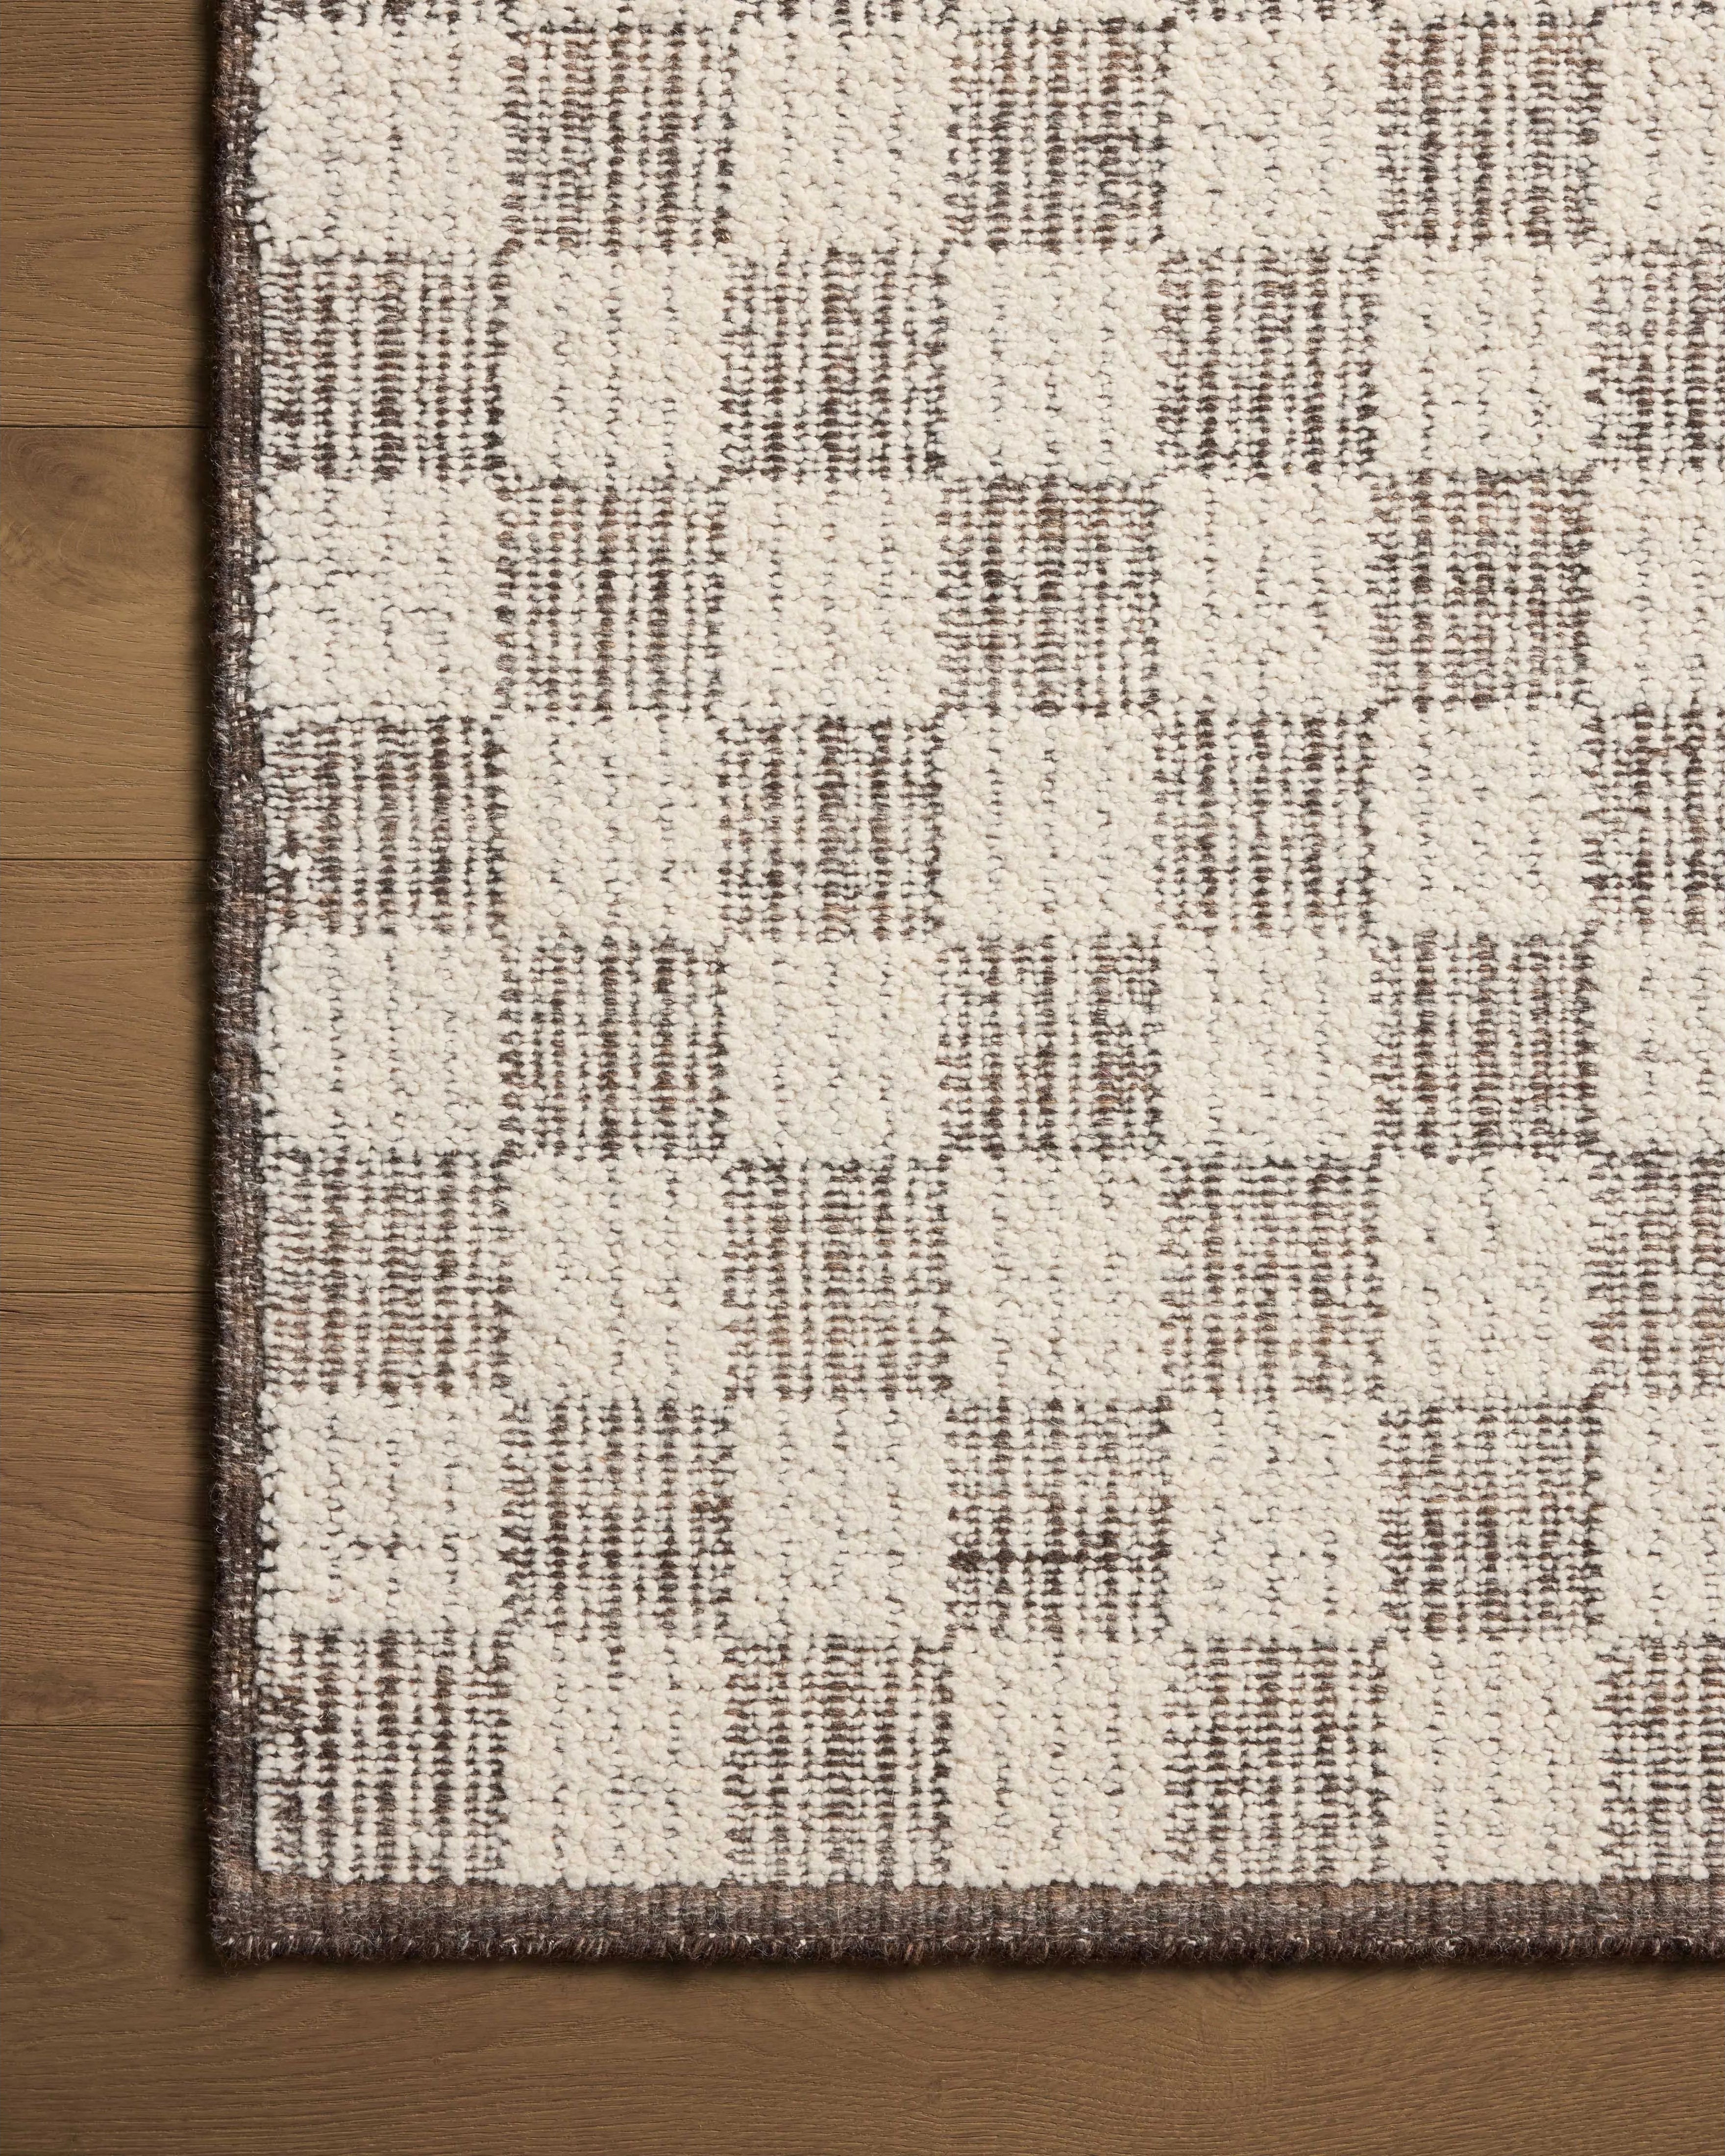 The Knox Ivory / Mocha Rug by Brigette Romanek x Loloi is a handwoven area rug with a contemporary checkerboard pattern and a texture reminiscent of a luxurious knit sweater. Made of a blend of wool and cotton that plays with scale and texture, Knox is imbued with cozy luxury that can anchor any room. Amethyst Home provides interior design, new home construction design consulting, vintage area rugs, and lighting in the Scottsdale metro area.